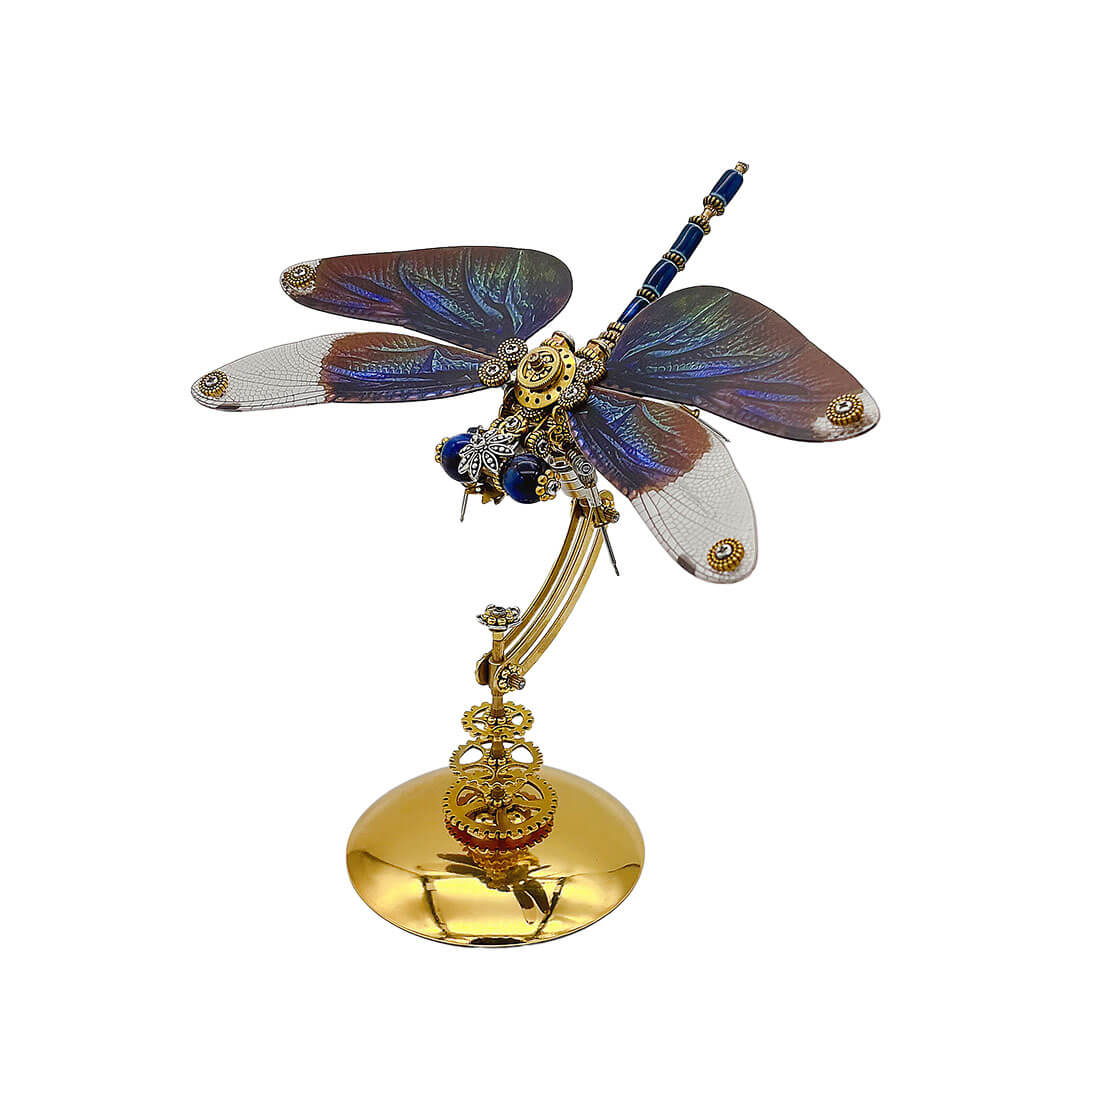 Mechanical Punk Metallic Dragonfly 3D DIY Insects Model Metal Assembly Toy Creative Ornament (200PCS)